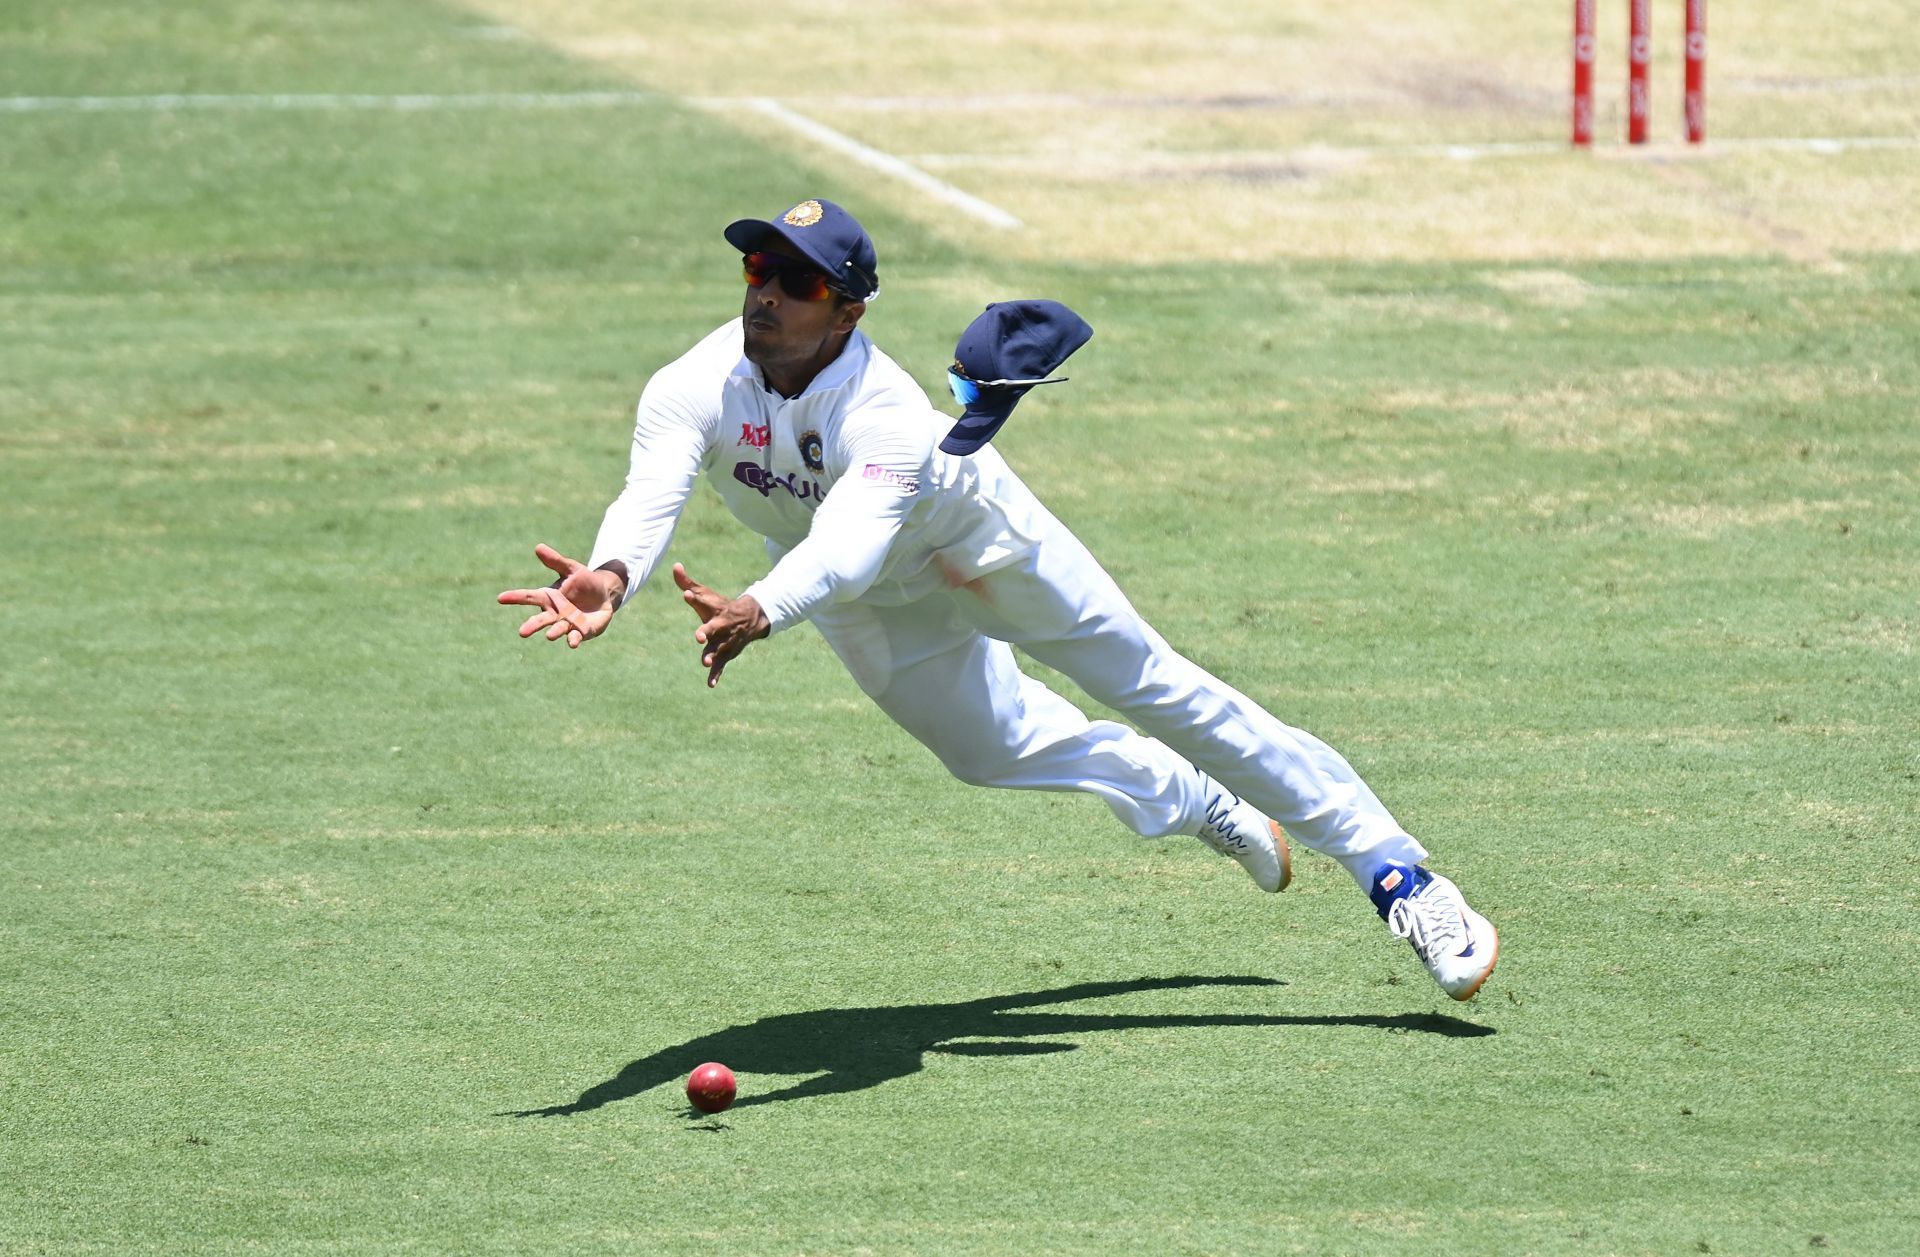 Mayank Agarwal scored a double century the last time India played a Test at the Holkar Cricket Stadium